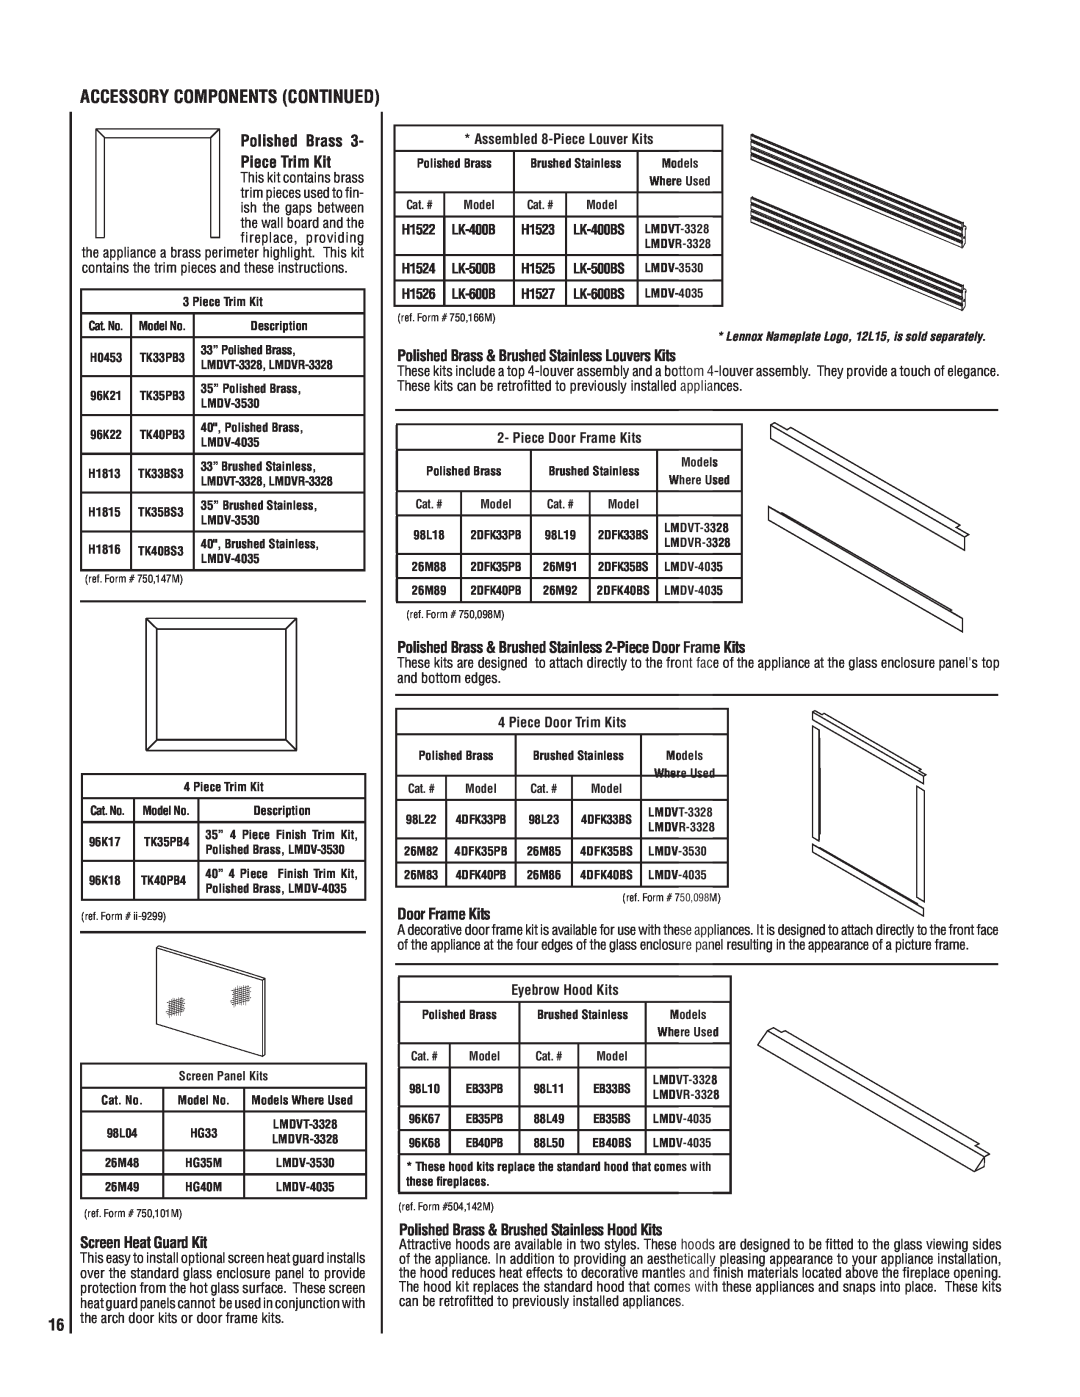 Maytag LMDV-33 SERIES ACCESSORY COMPONENTS CONTINUED Polished Brass, Piece Trim Kit, Screen Heat Guard Kit, H1523, H1525 